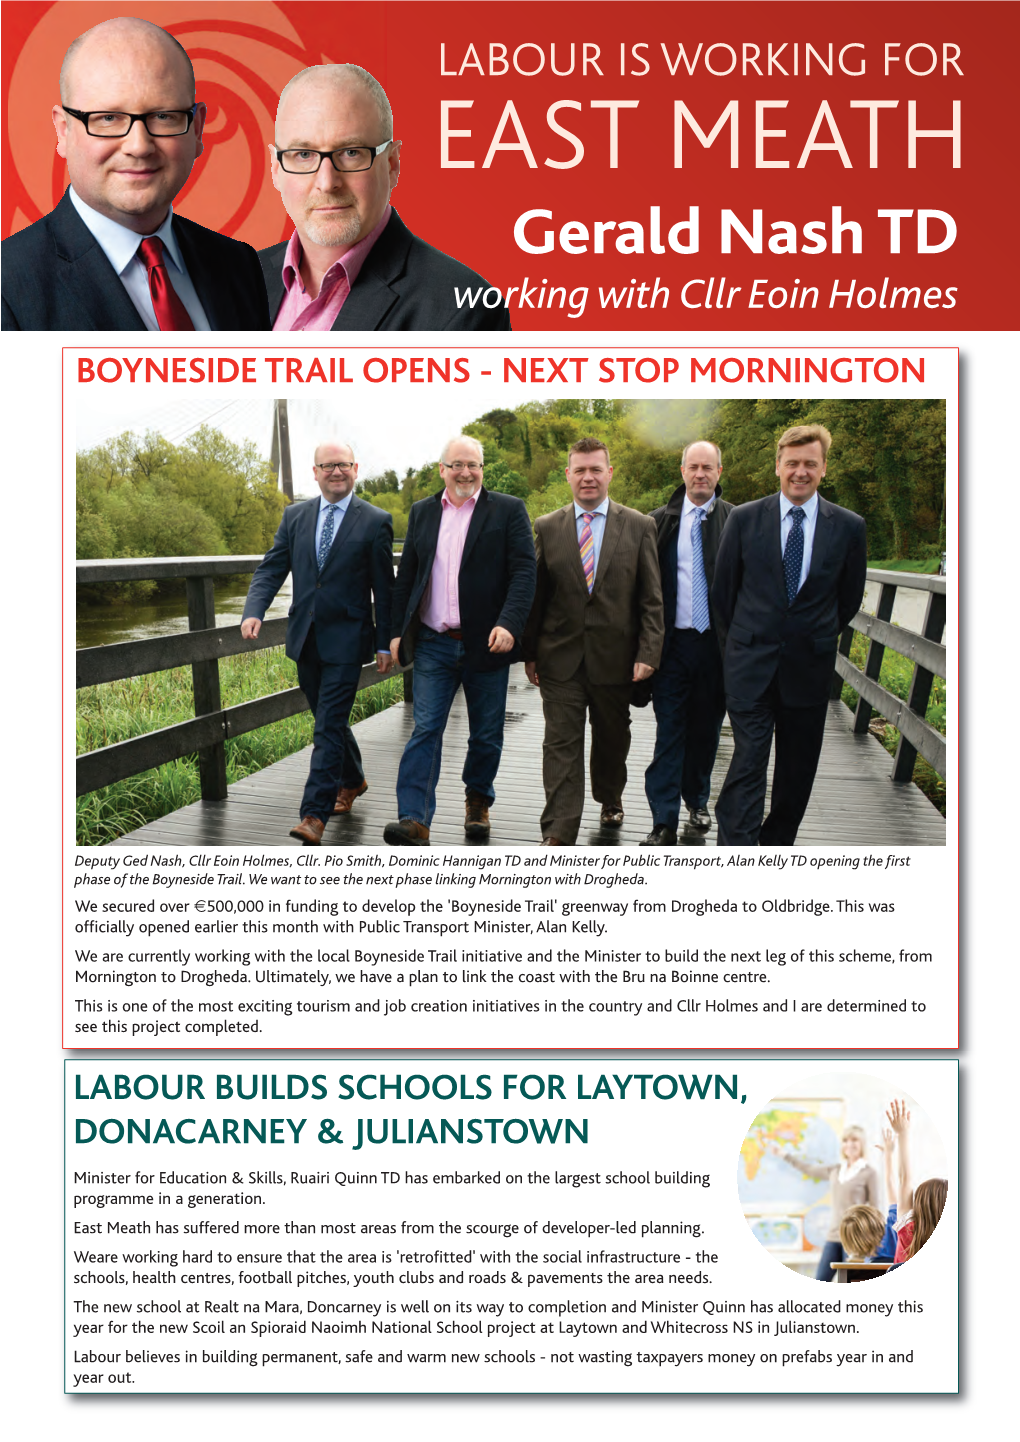 EAST MEATH Gerald Nash TD Working with Cllr Eoin Holmes BOYNESIDE TRAIL OPENS - NEXT STOP MORNINGTON